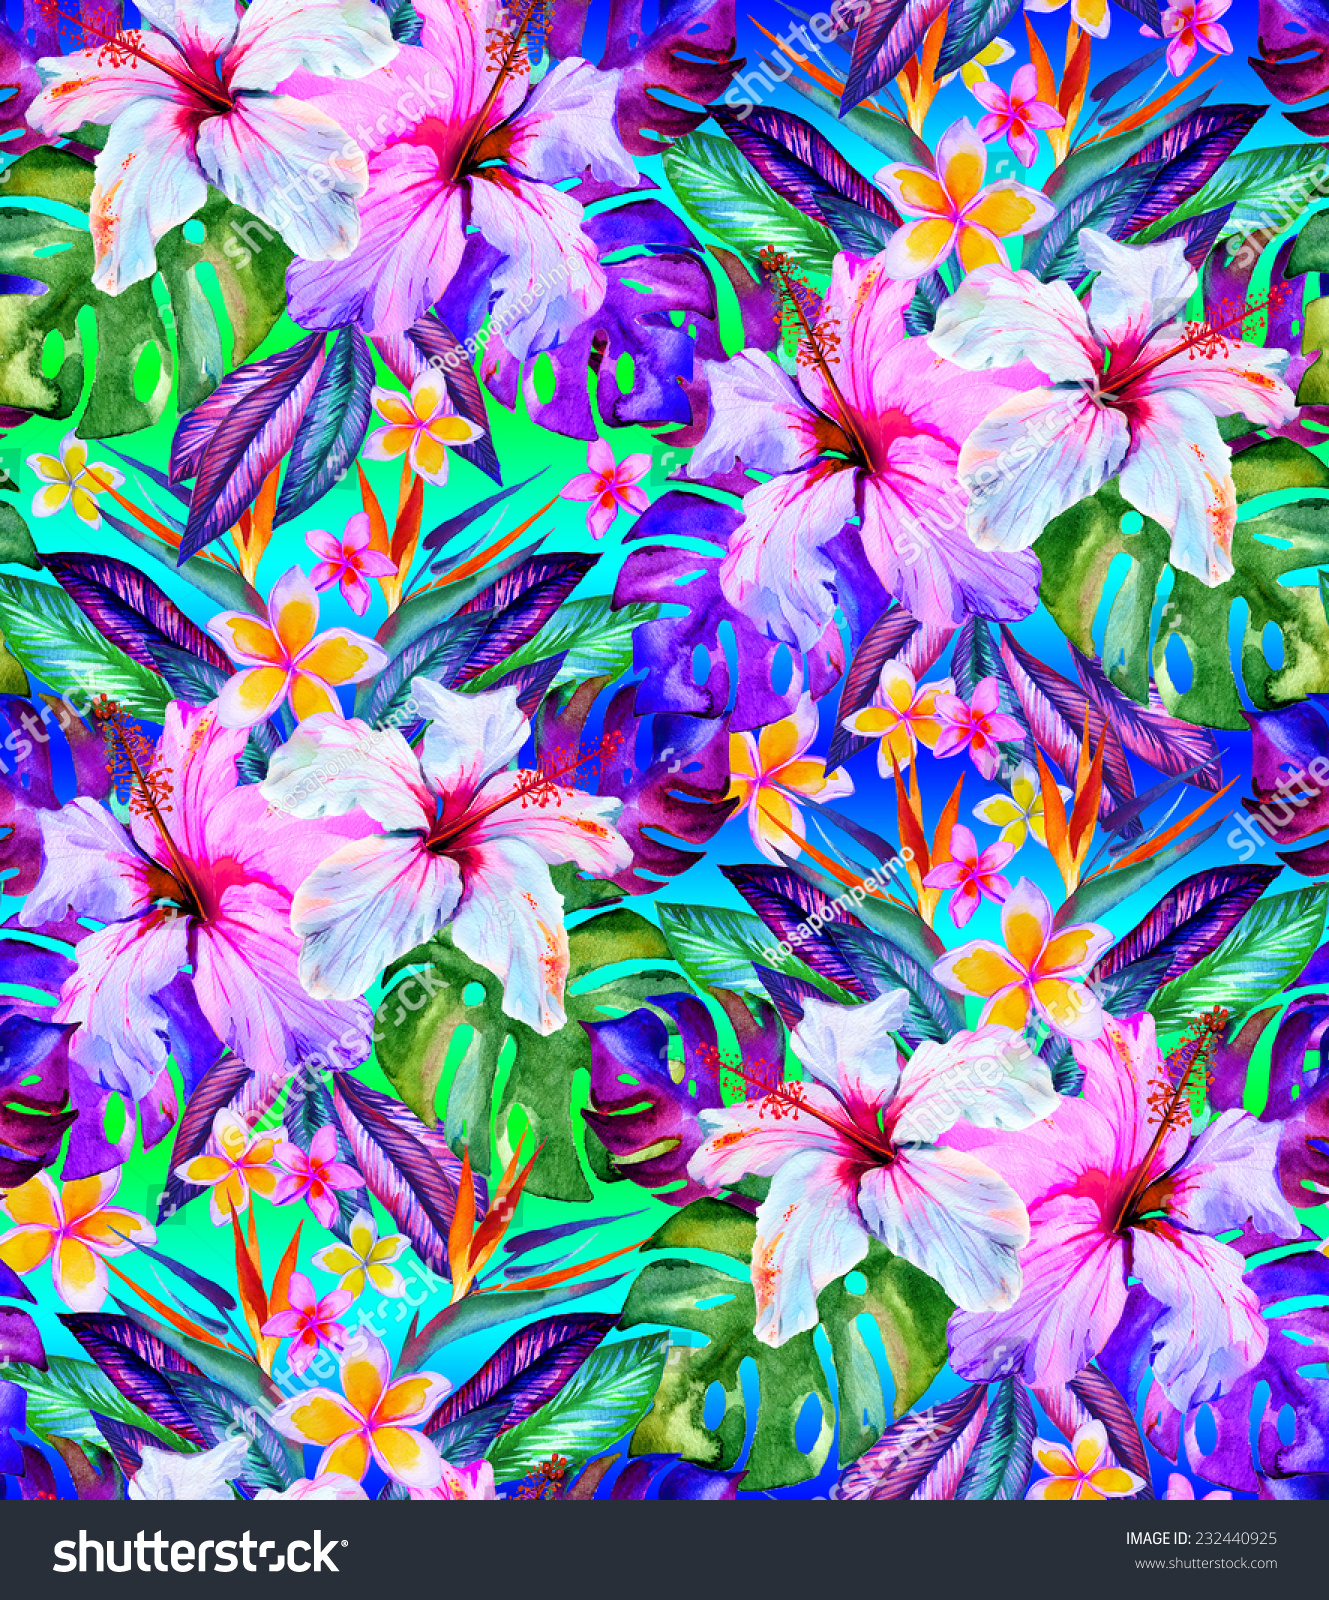 Seamless Summer Fashion Floral Pattern Tropical Stock Illustration 232440925